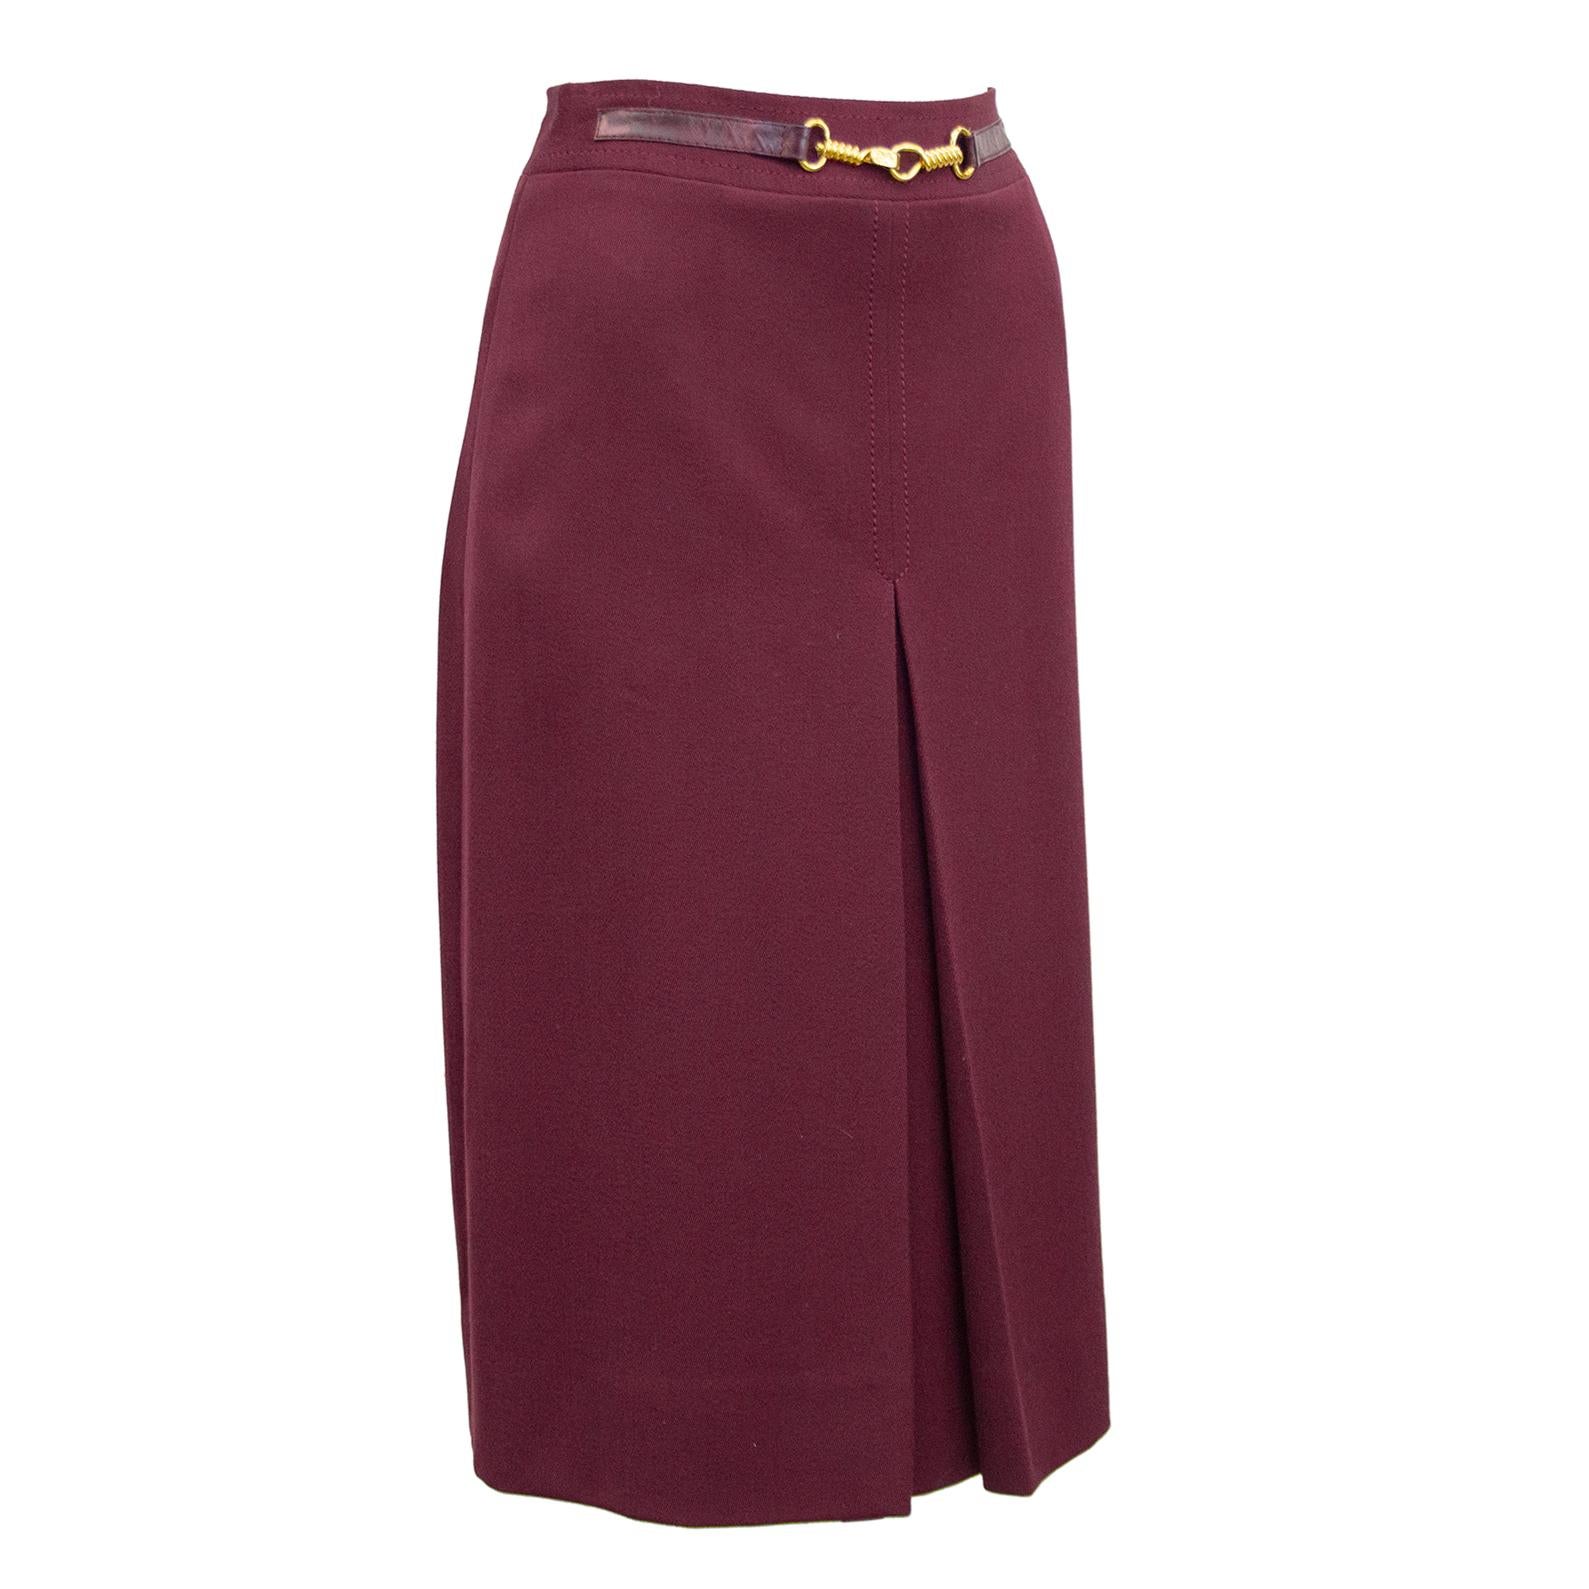 1970's classic Celine maroon wool gabardine skirt with half maroon leather and gold belt at waistband. Inverted stitched single box pleat on the front and back. Overall A line shape. In excellent condition, side zipper with hook and eye. Fits like a